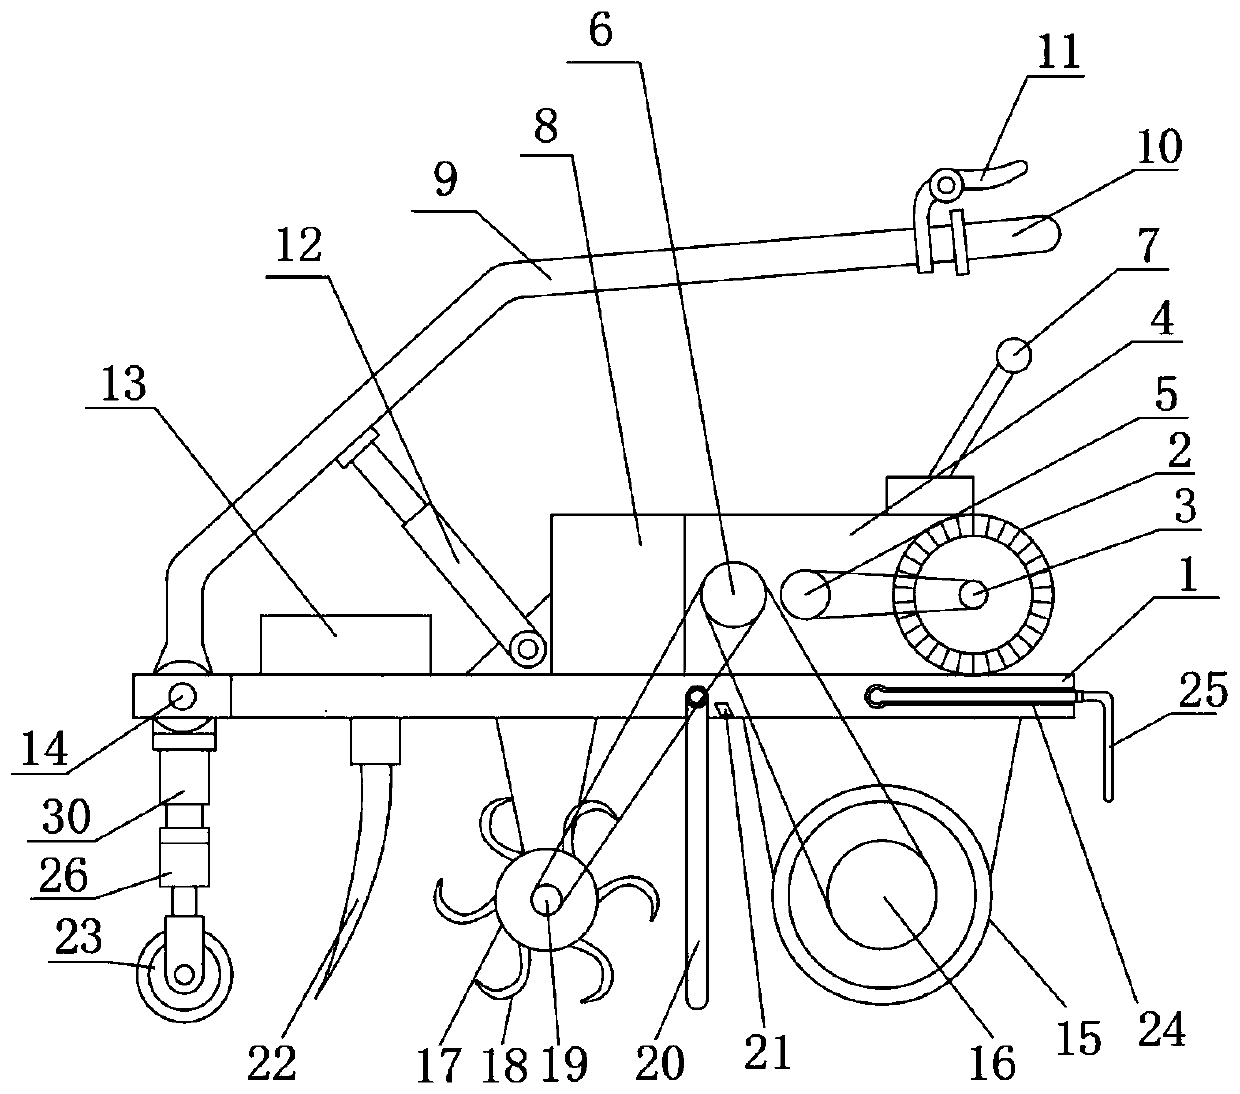 Ploughing machine for planting fruit trees